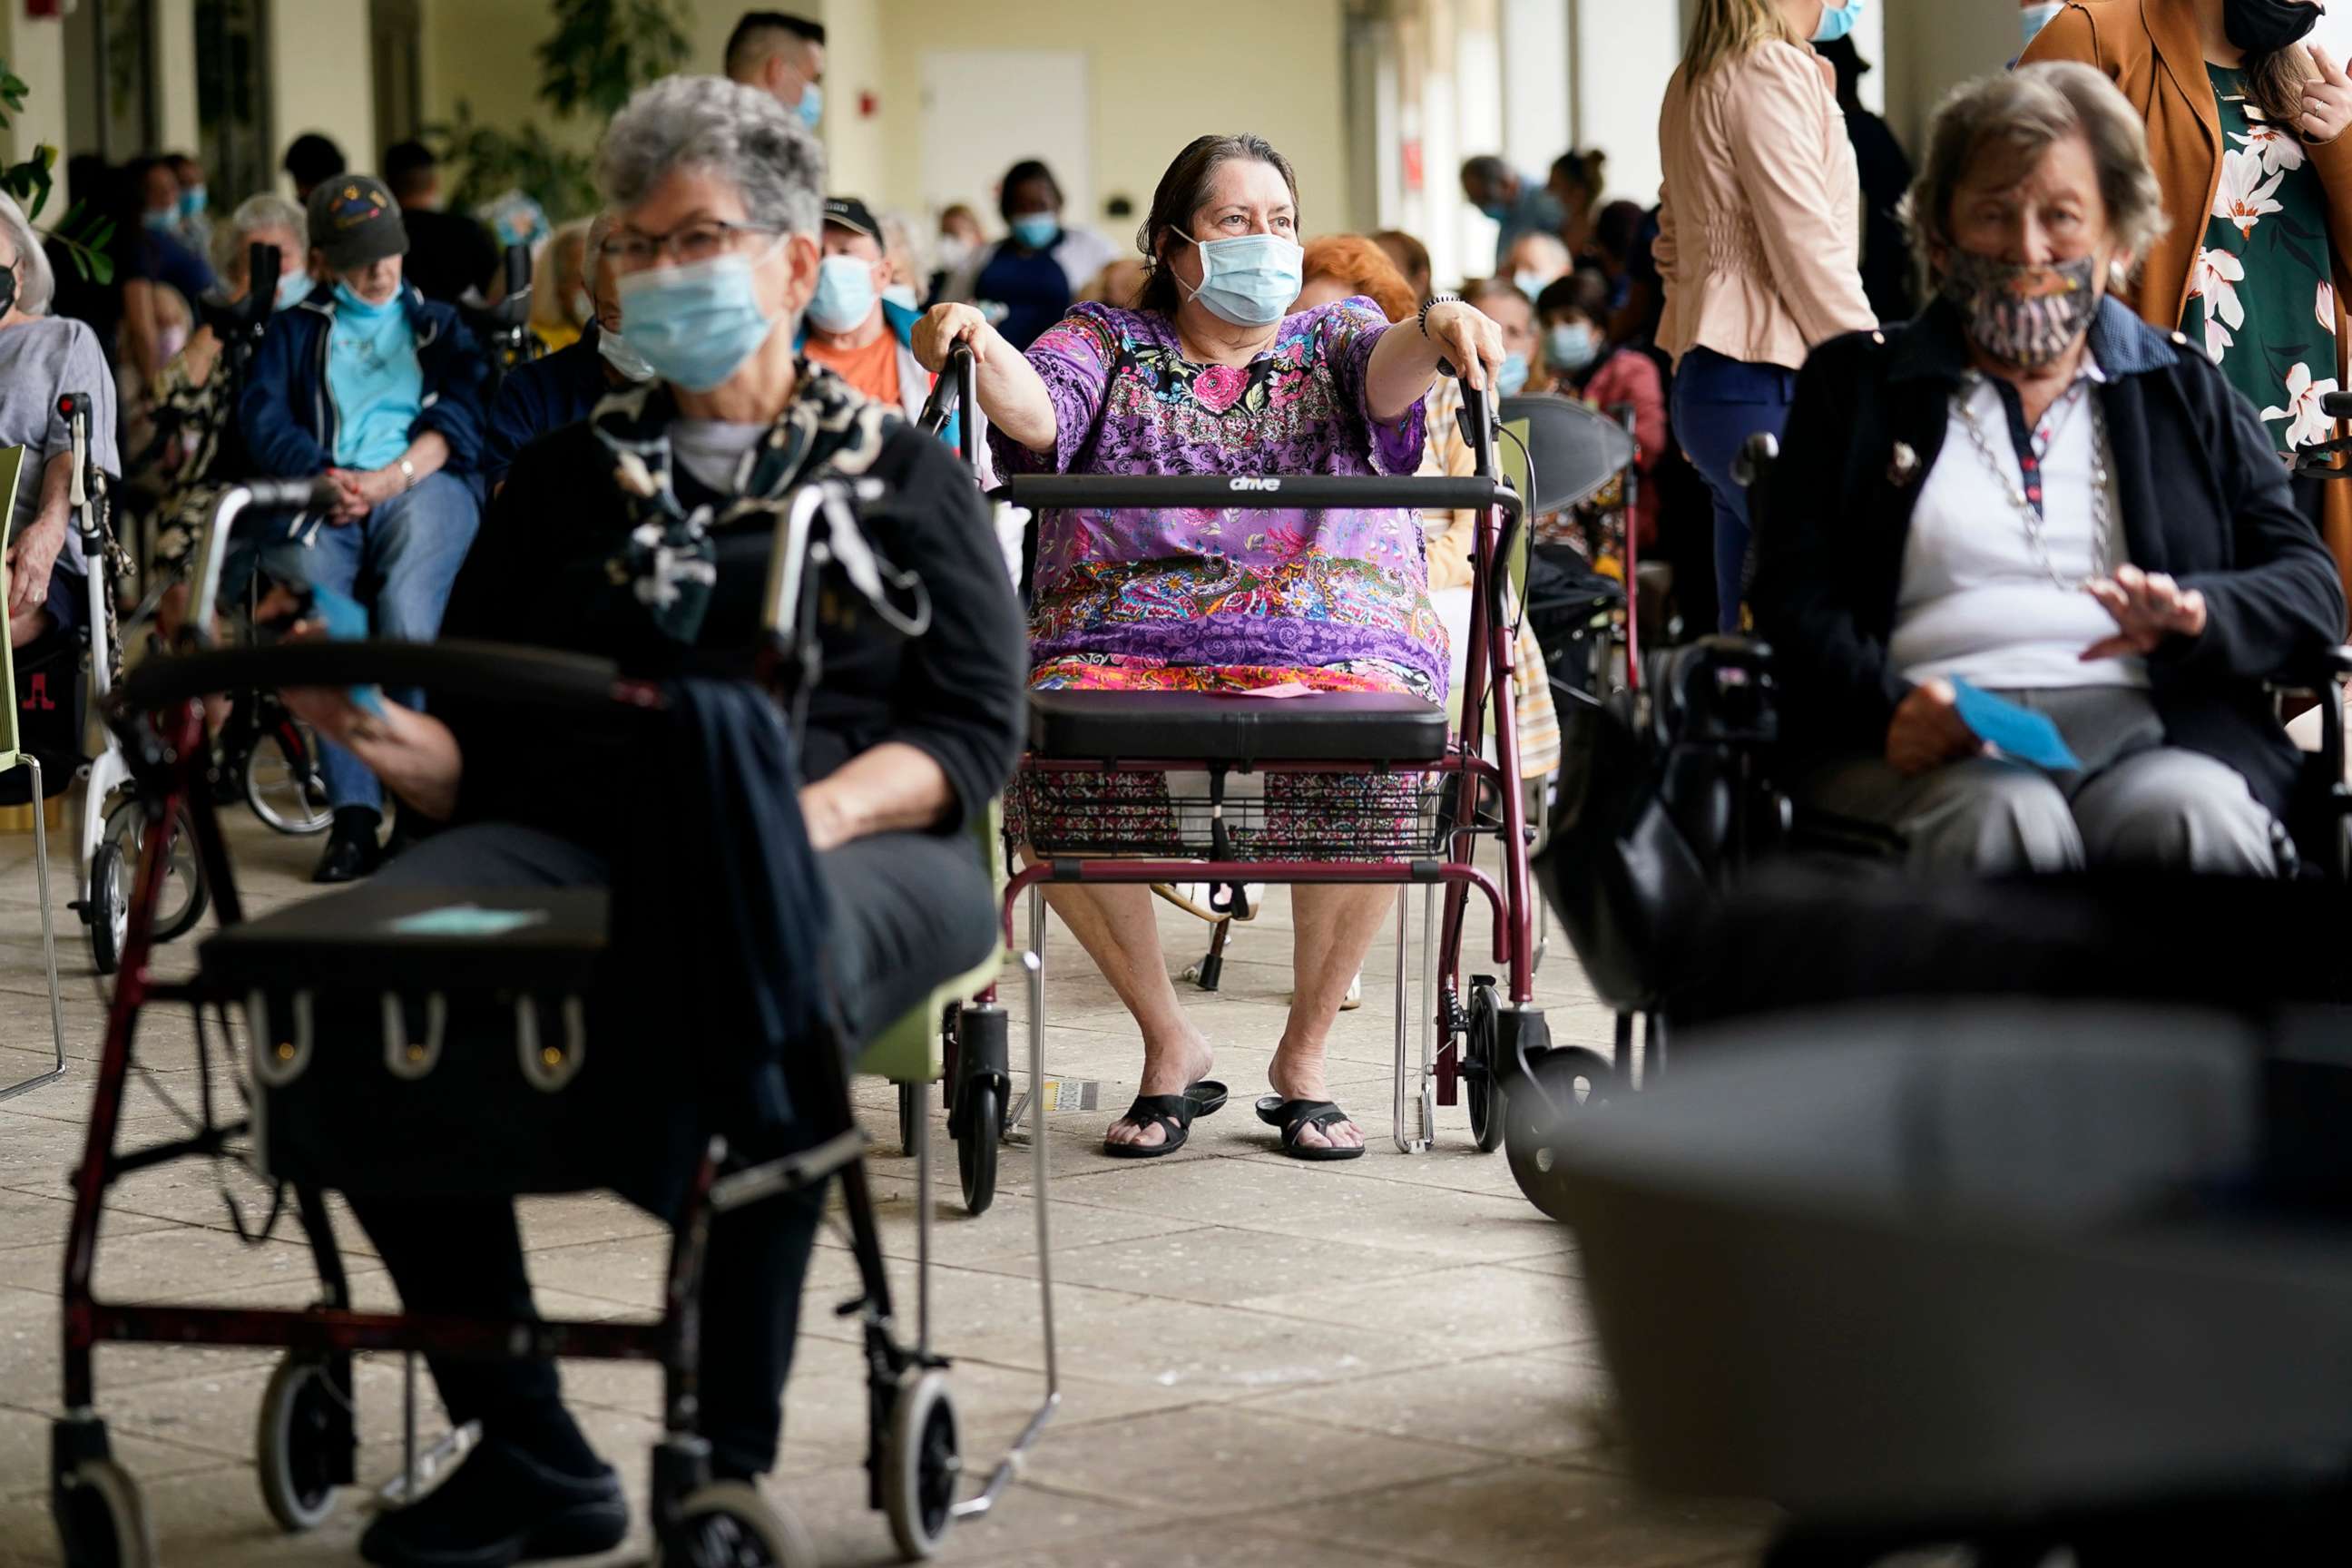 PHOTO: Resident Sabeth Ramirez, 80, center, waits in line with others for the Pfizer-BioNTech COVID-19 vaccine at the The Palace assisted living facility in Coral Gables, Fla., Jan. 12, 2021.